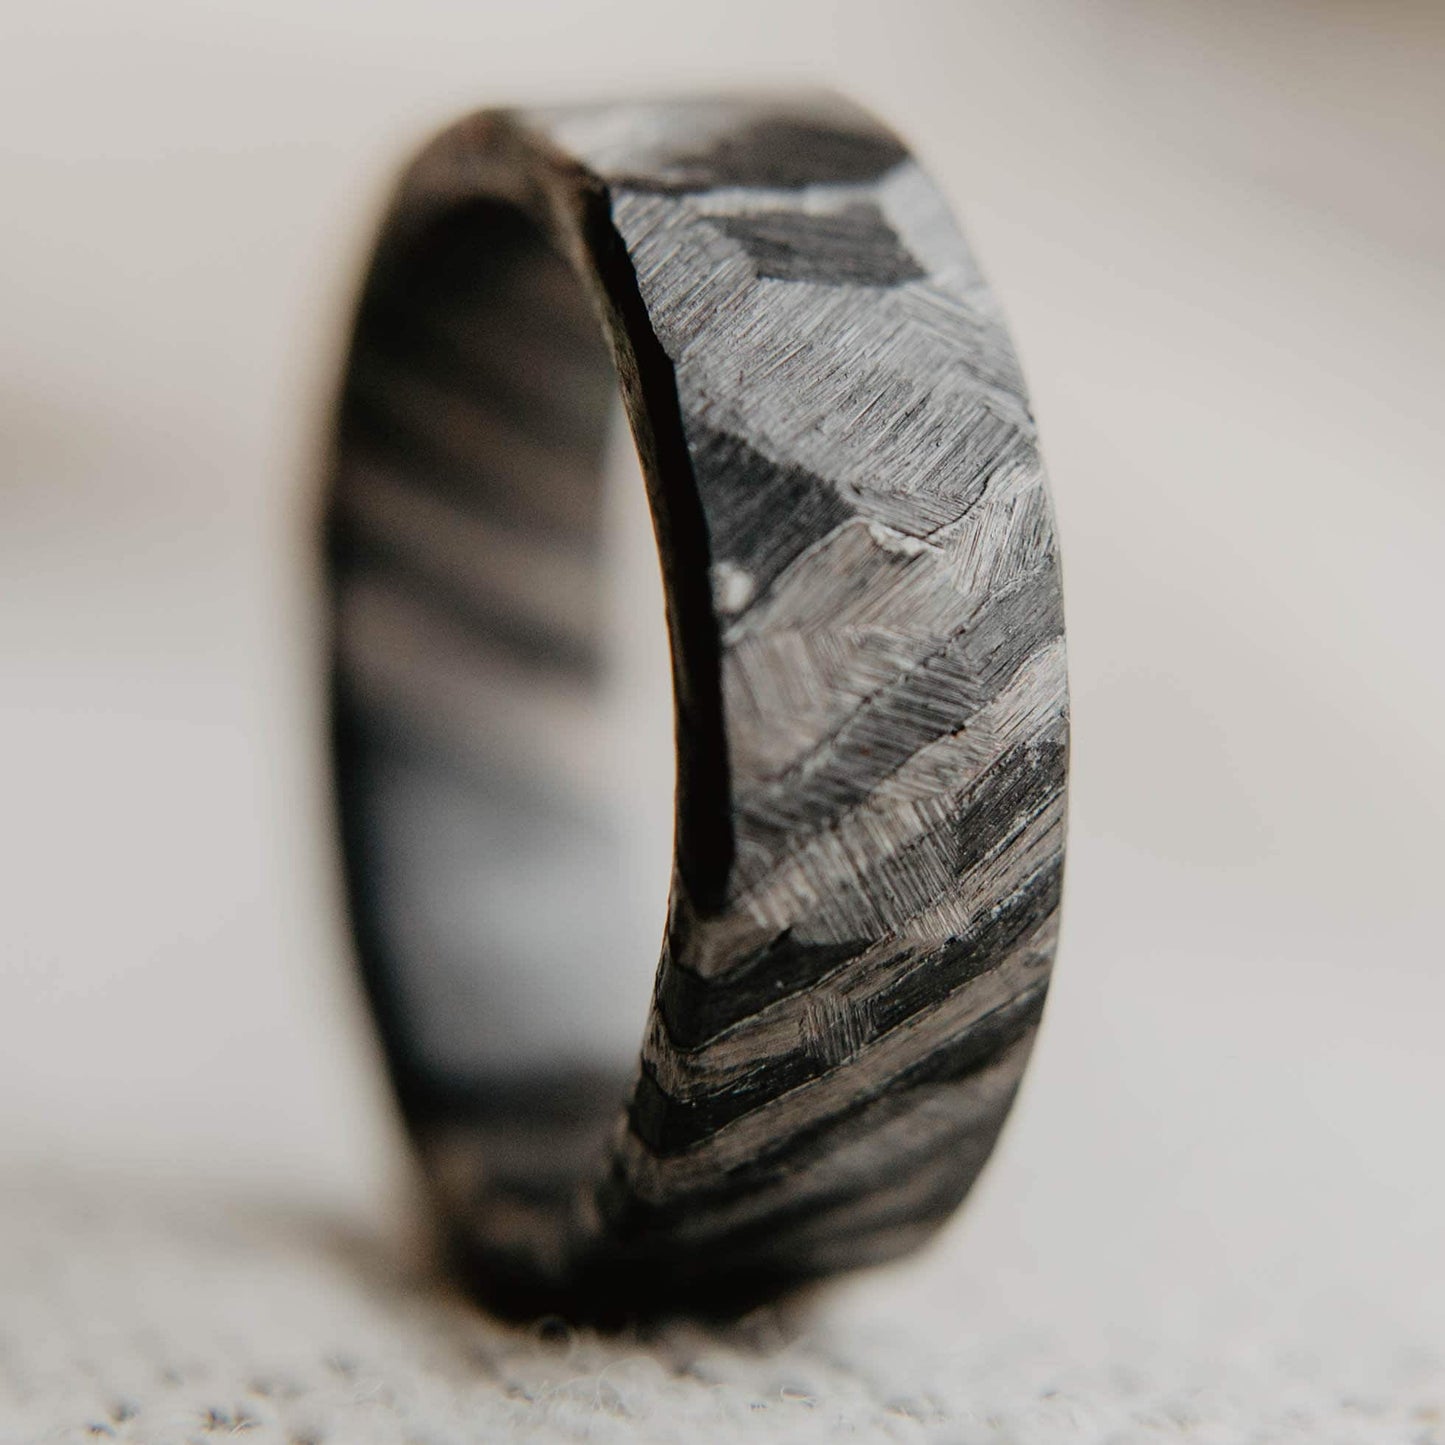 Distressed Black Zirconium and Titanium Damascus Wedding Band. Black and Gray Ring. (Vertical with cloth background)